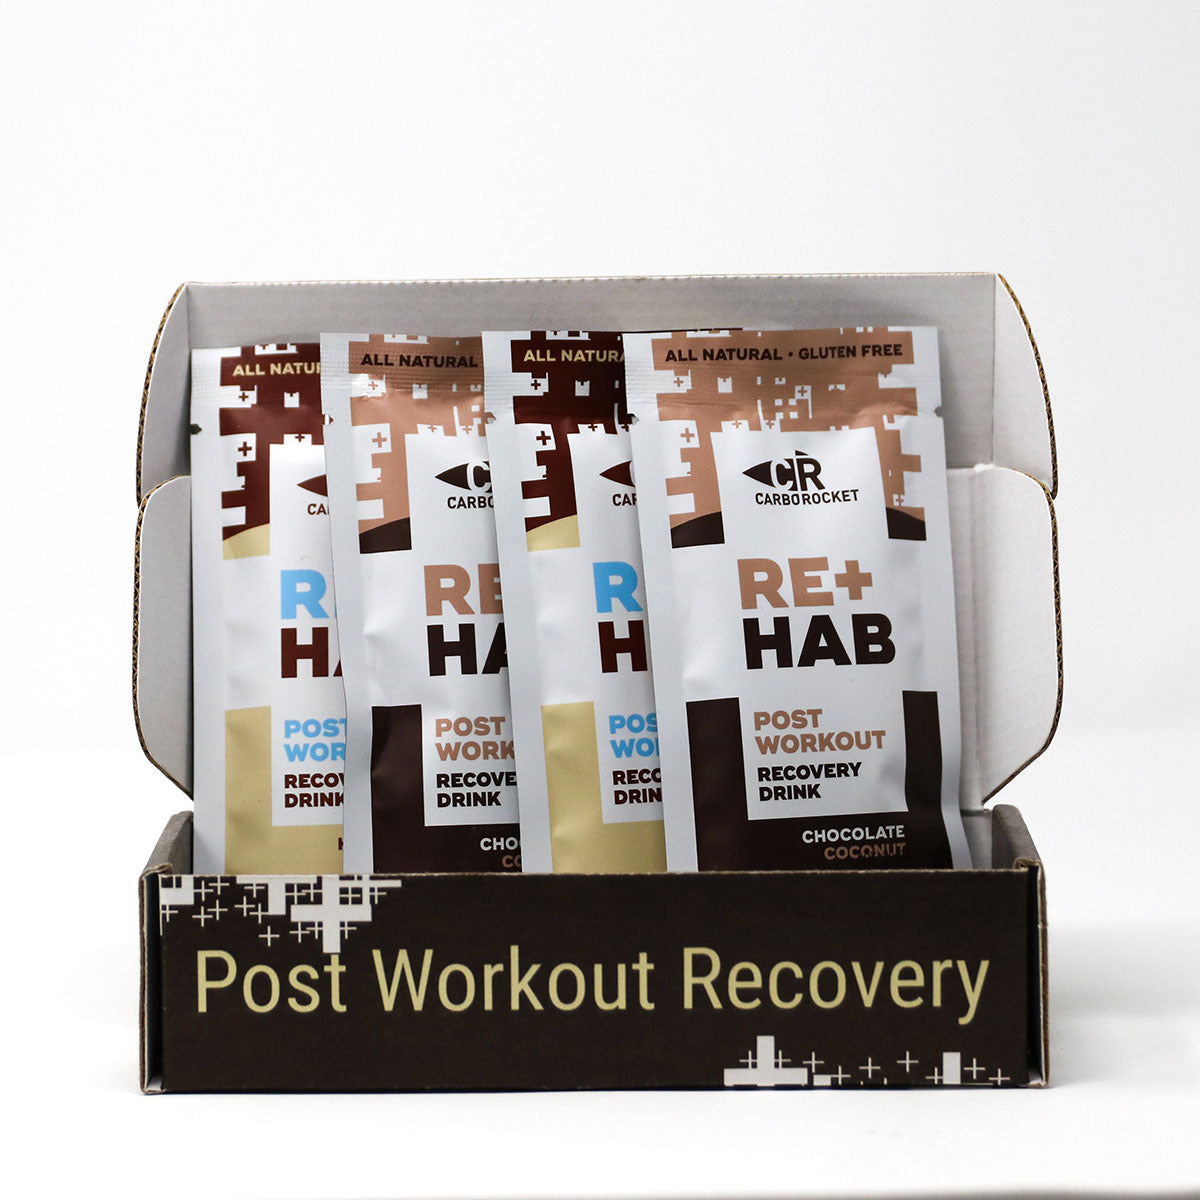 Rehab Post Workout Recovery Challenge Box!